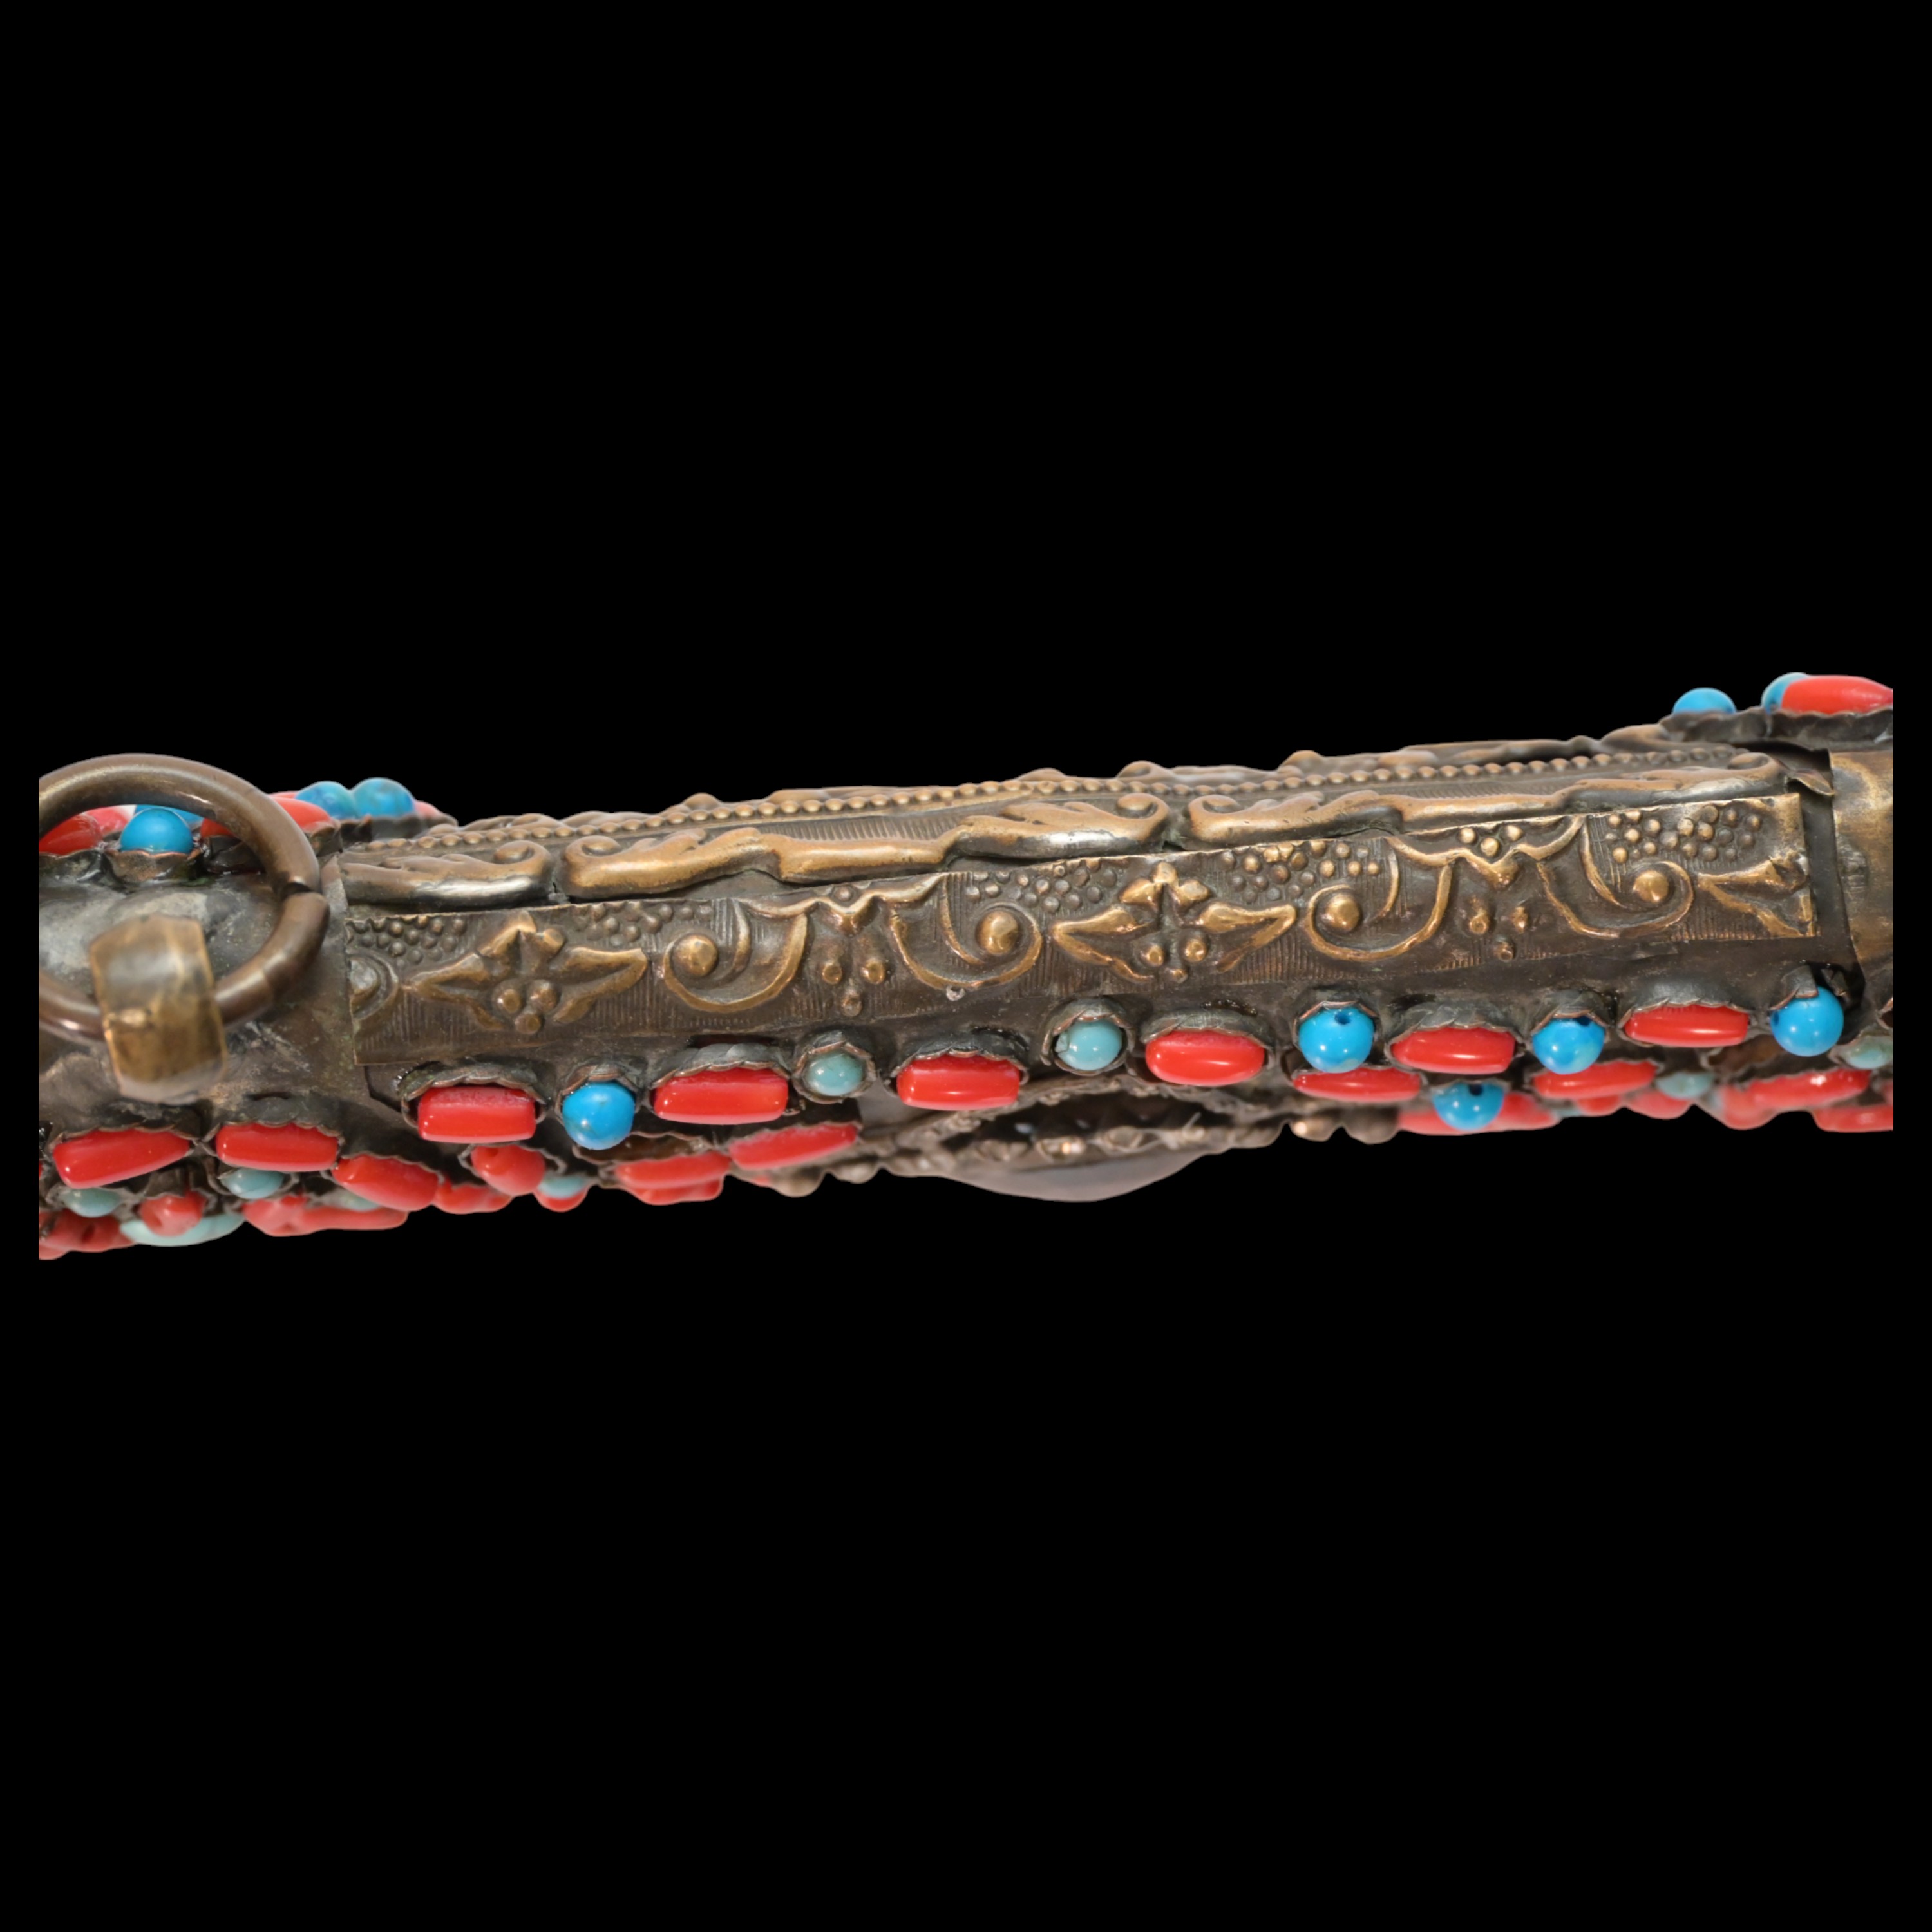 Rare Ottoman sword, Kilij, Pala, decorated with corals and turquoise, Turkey, Trabzon, around 1800. - Image 14 of 31